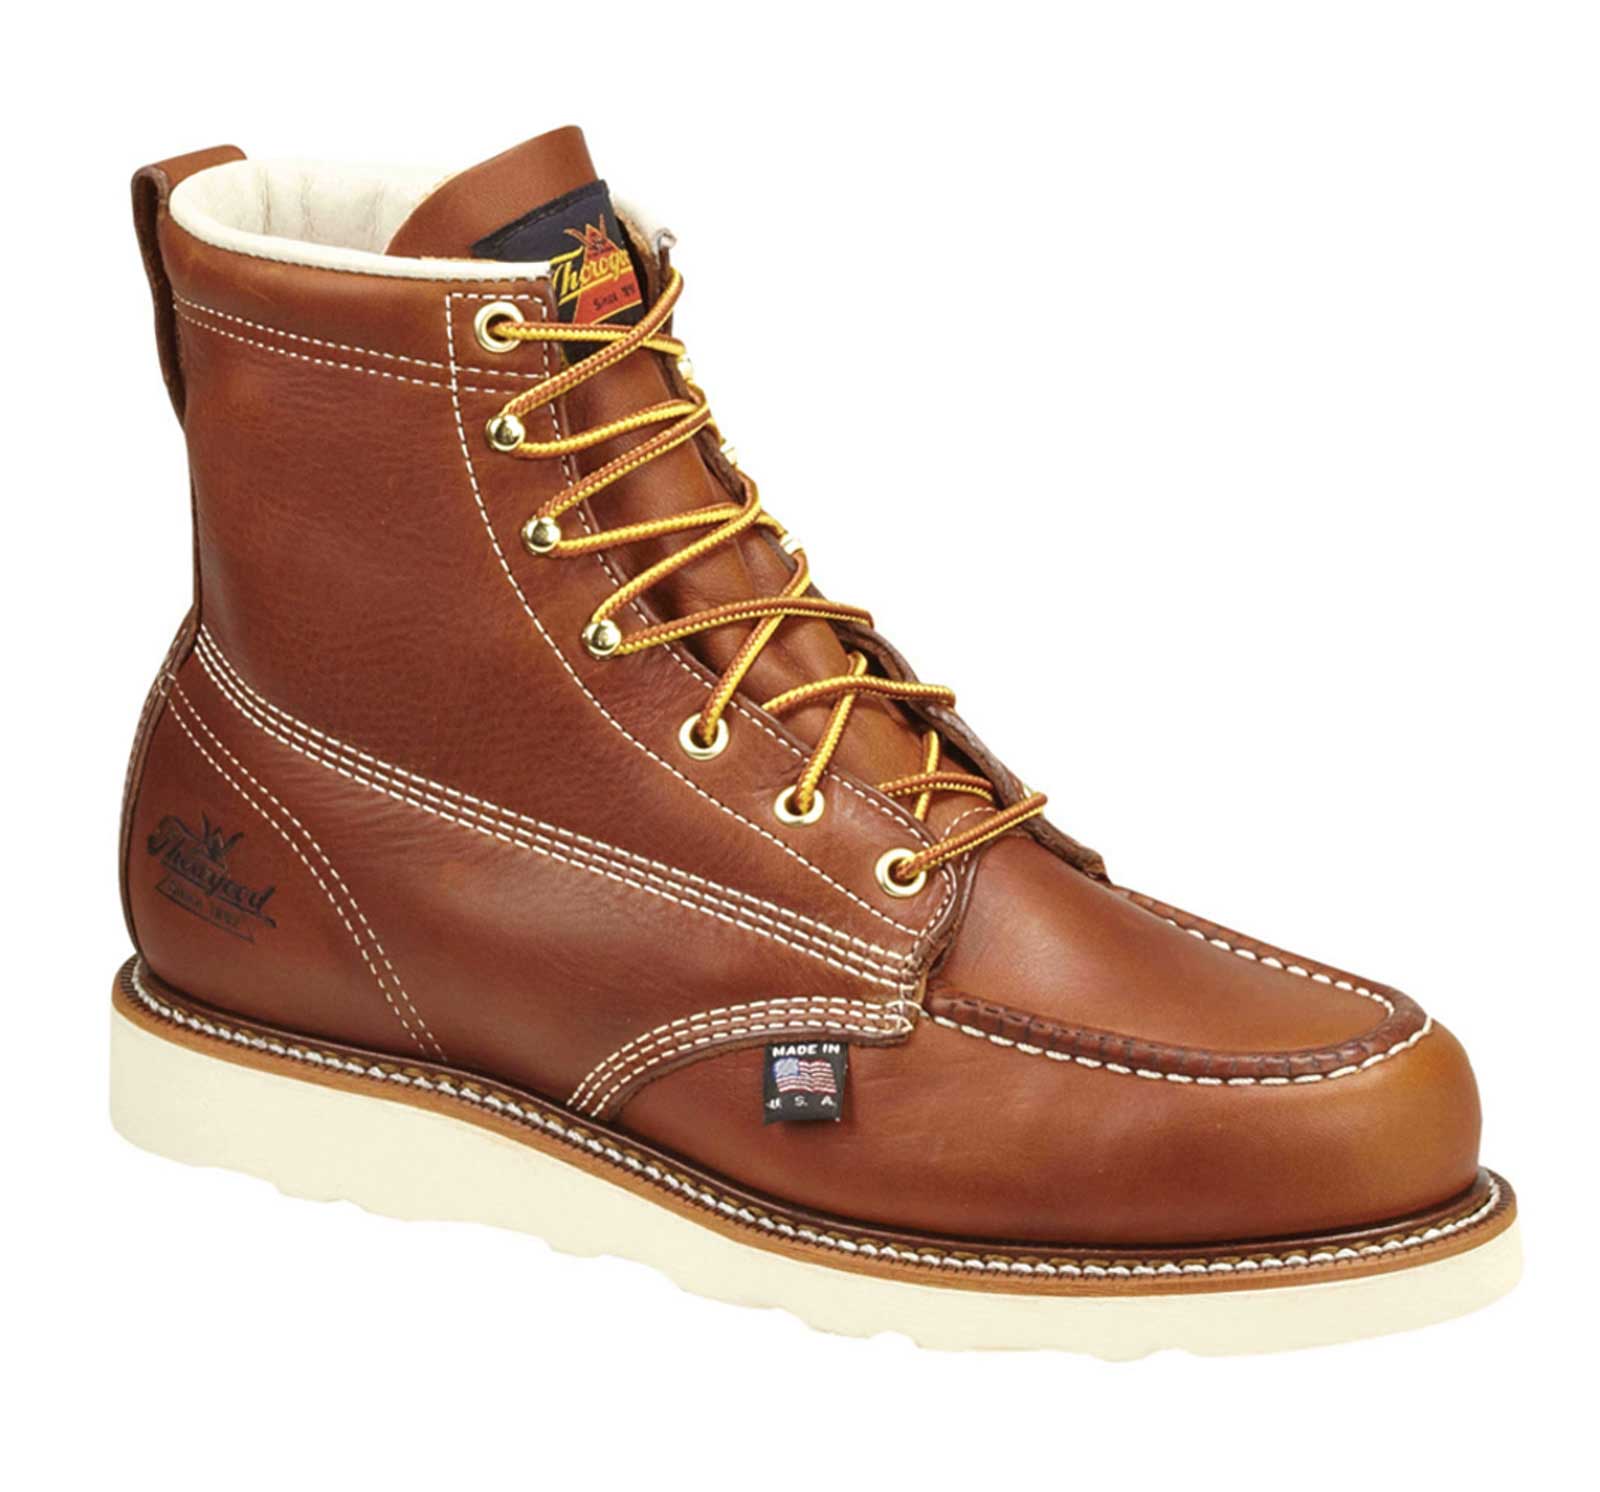 wedge sole safety toe work boots